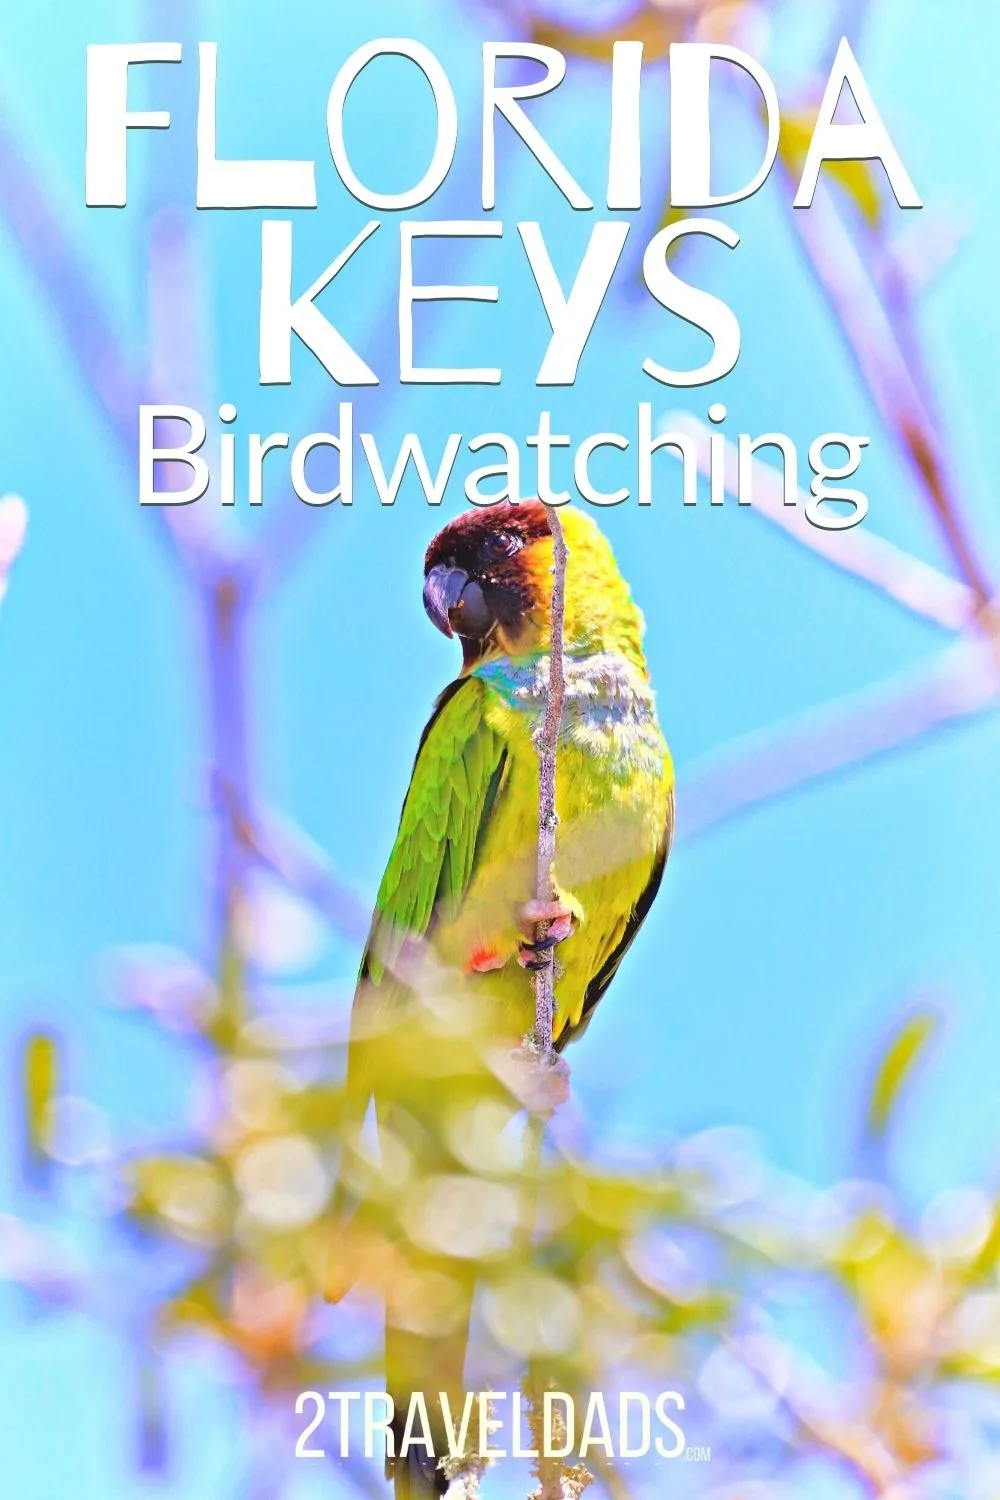 Birdwatching in the Florida Keys is amazing. With a diverse range of bird species inhabiting the area's unique coastal habitats and low-lying tropical forests, we have tips for spotting wildlife and where the best birding in the Keys is!